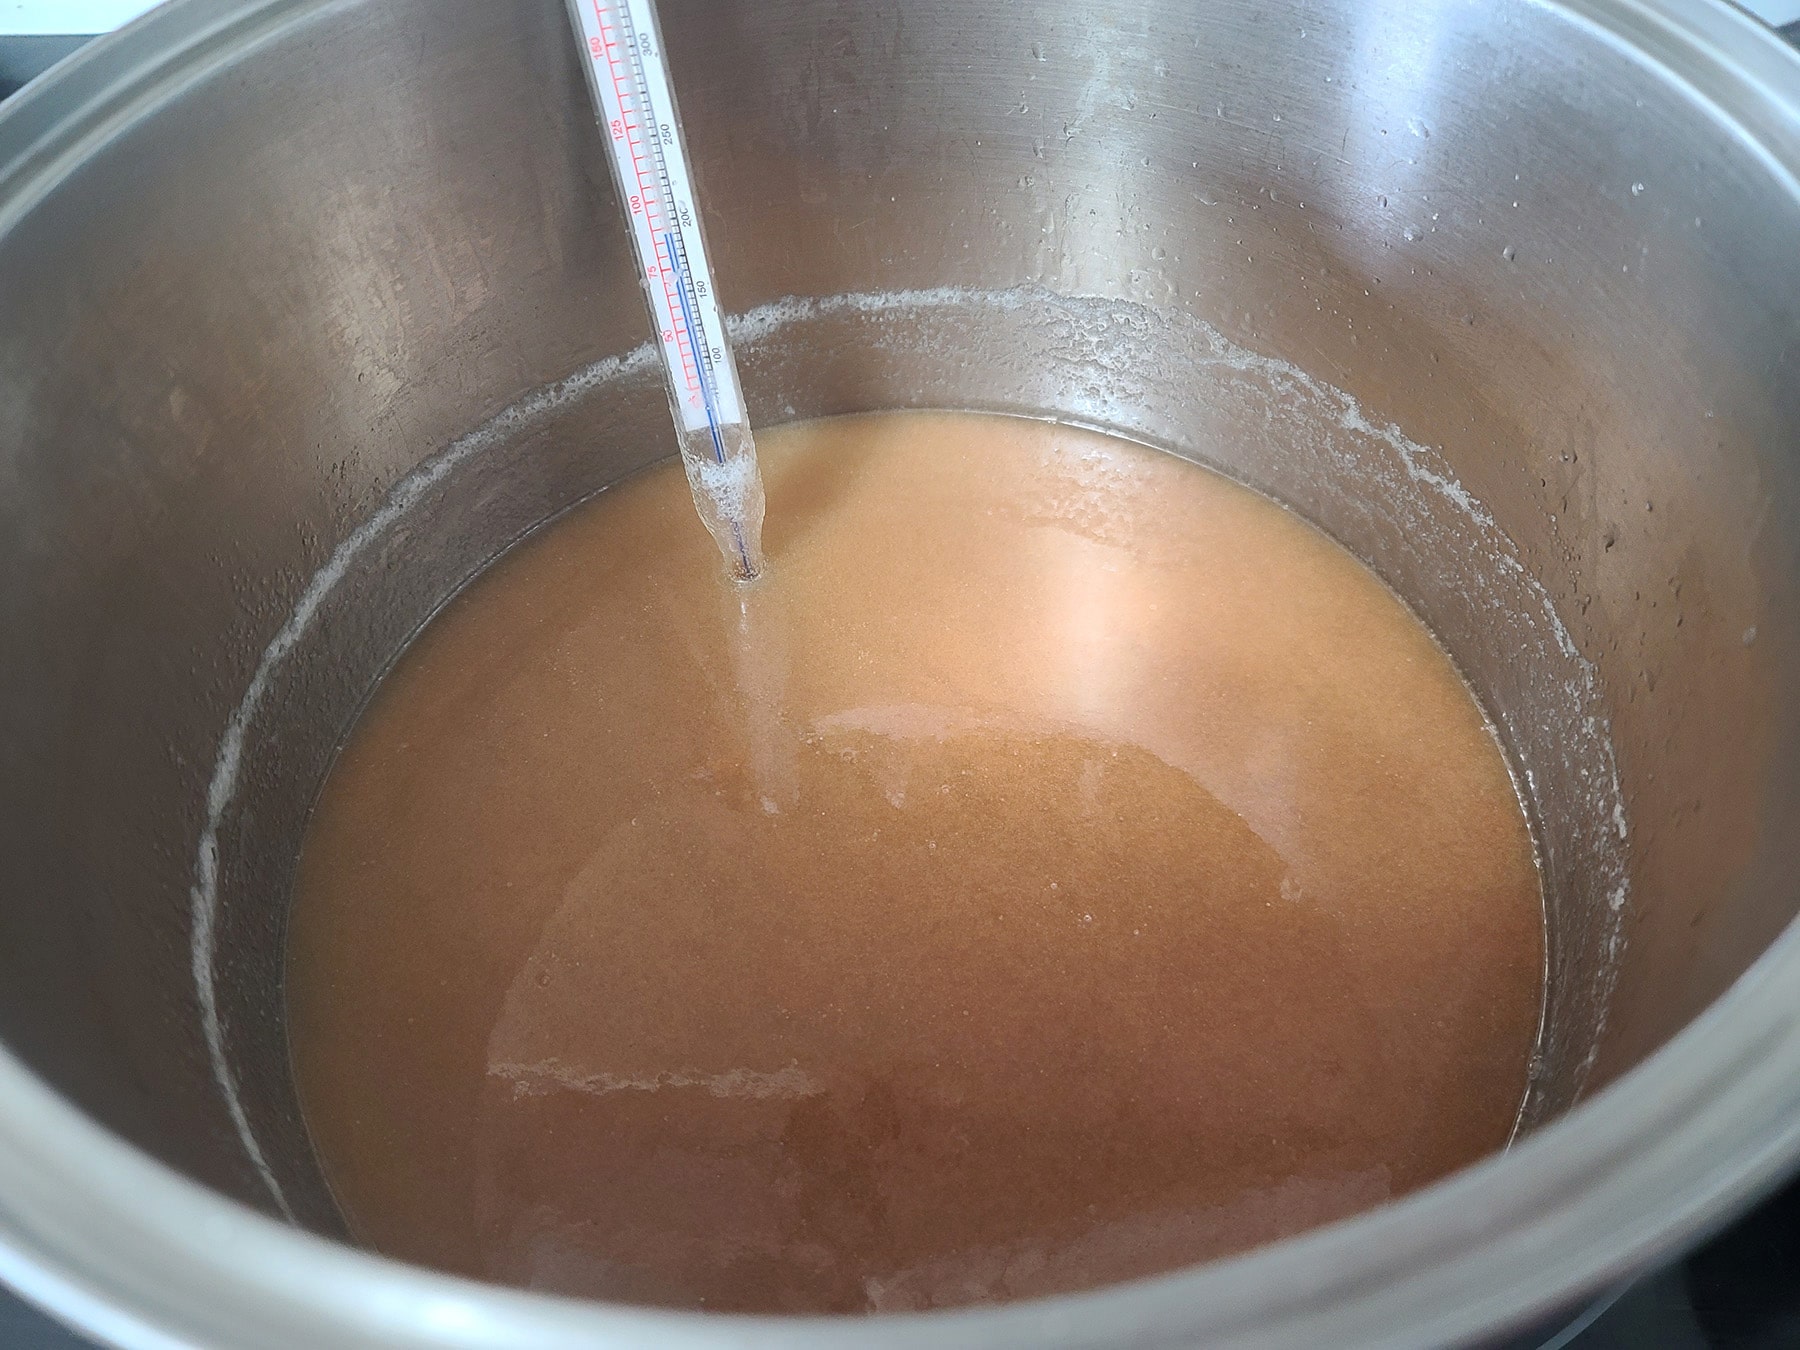 The pot of fudge has been taken off the burner and is cooling.